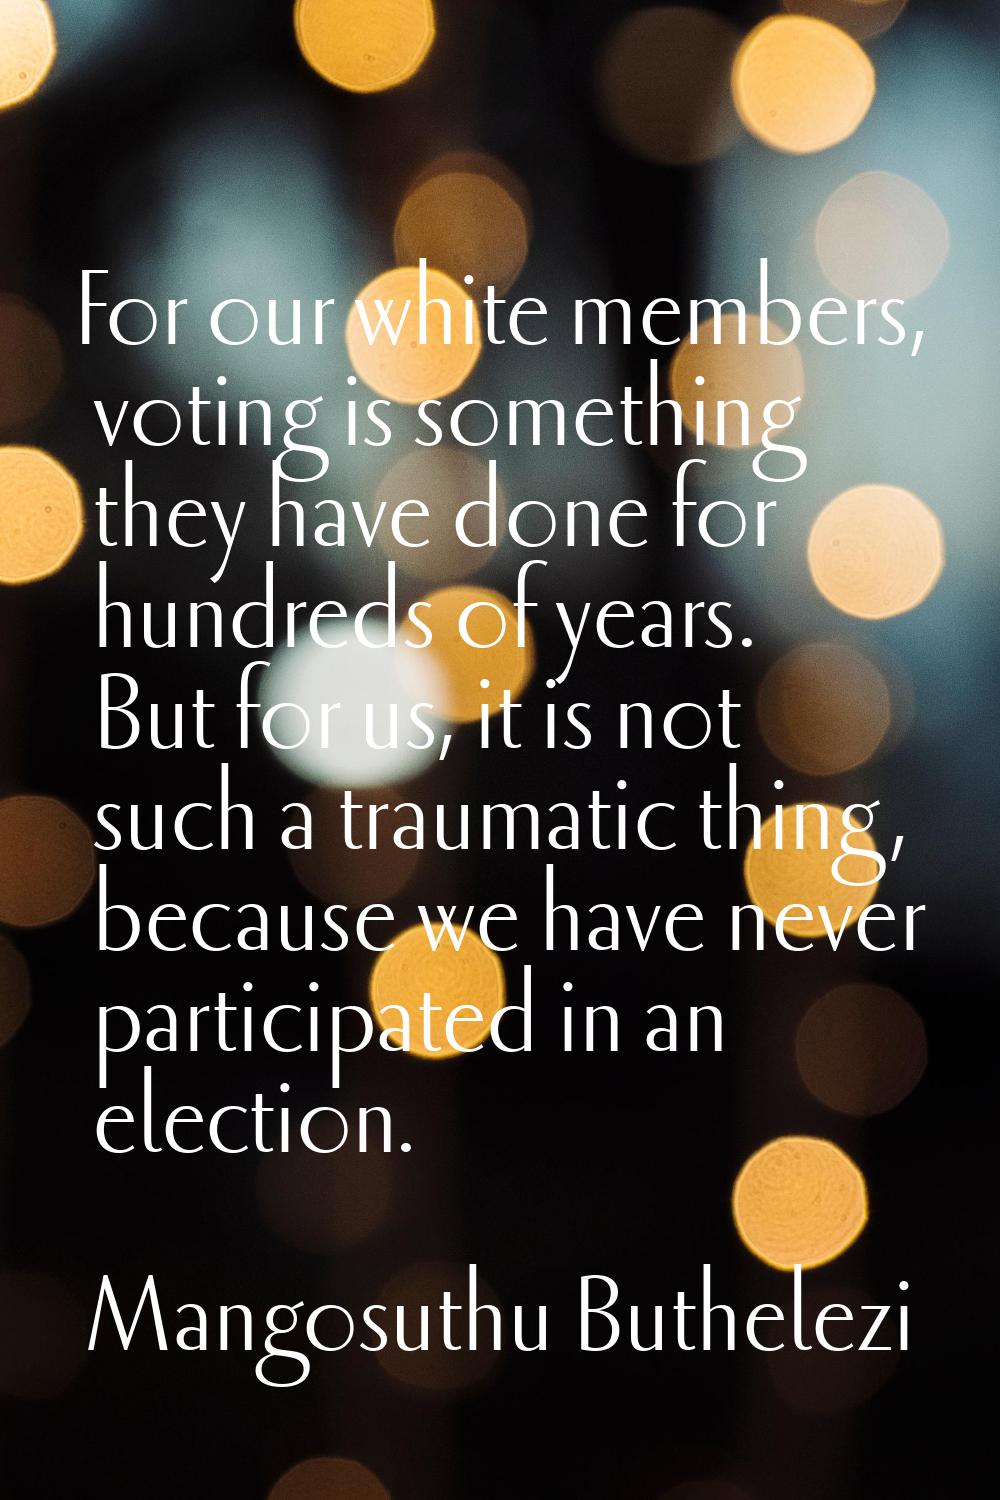 For our white members, voting is something they have done for hundreds of years. But for us, it is 